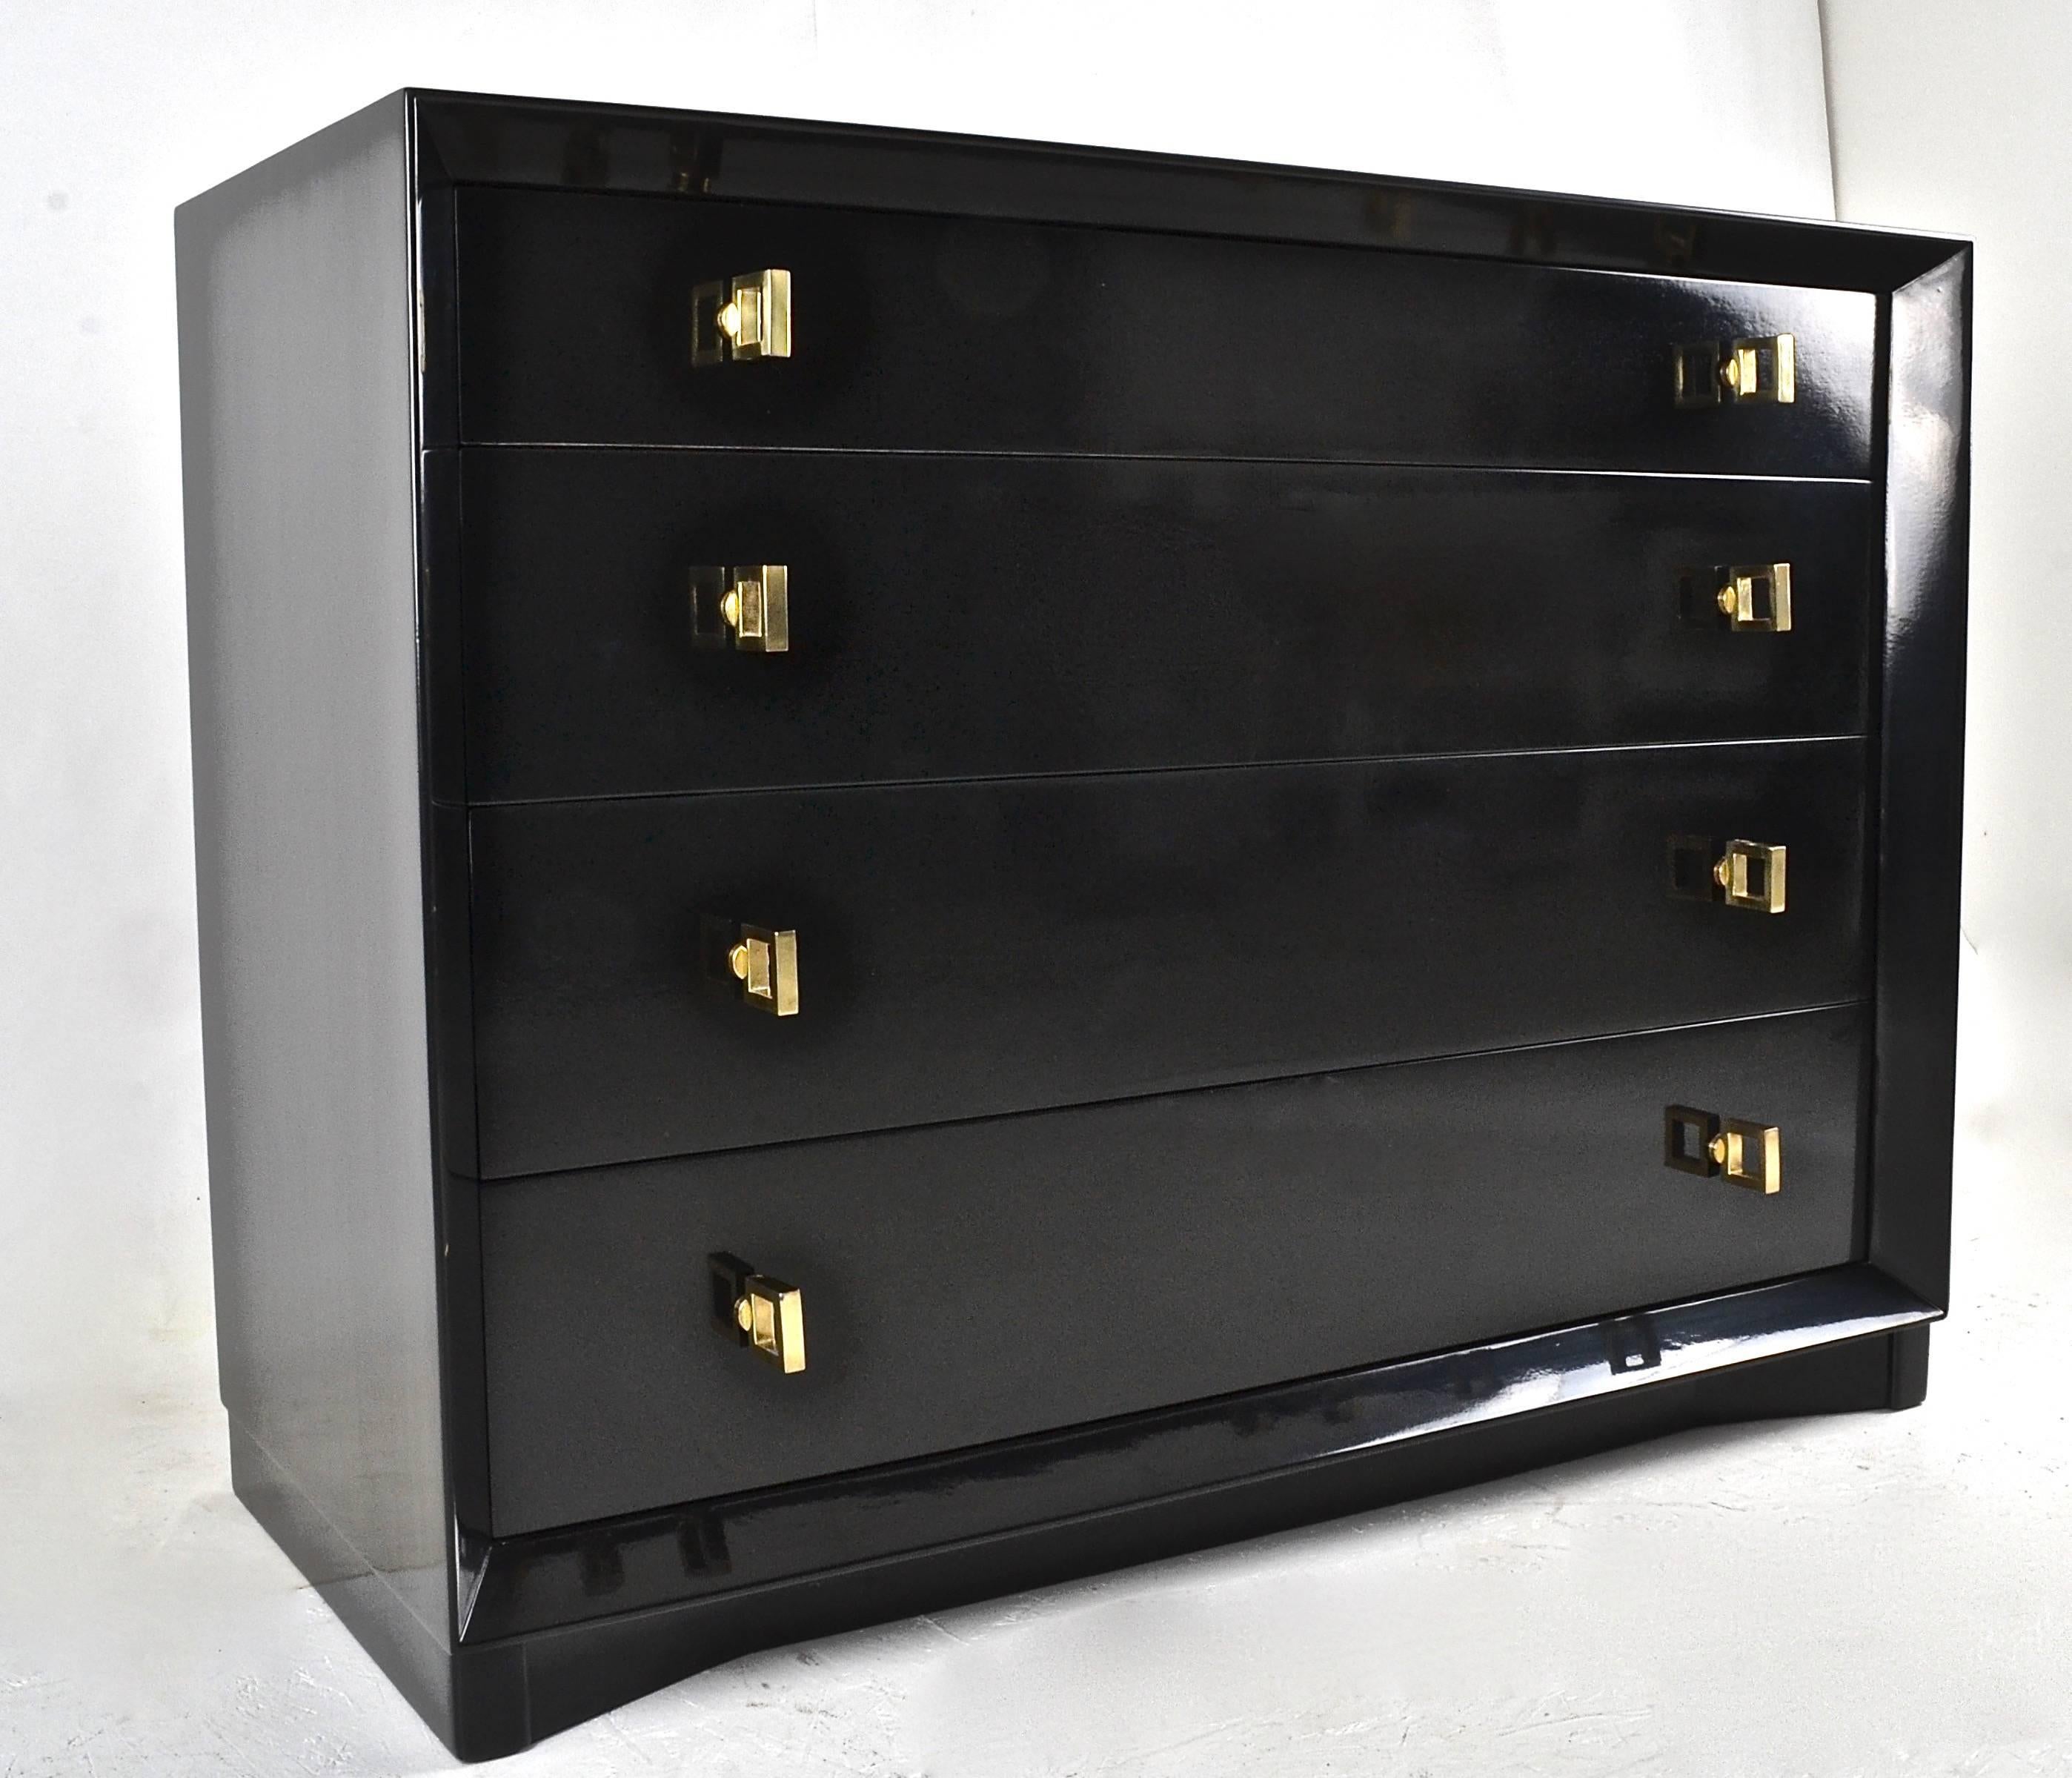 Newly finished in high gloss black lacquer, a Classic form early modern chest with four drawers. Original brass finish pulls have been polished and lacquered. Quality construction --all wood.